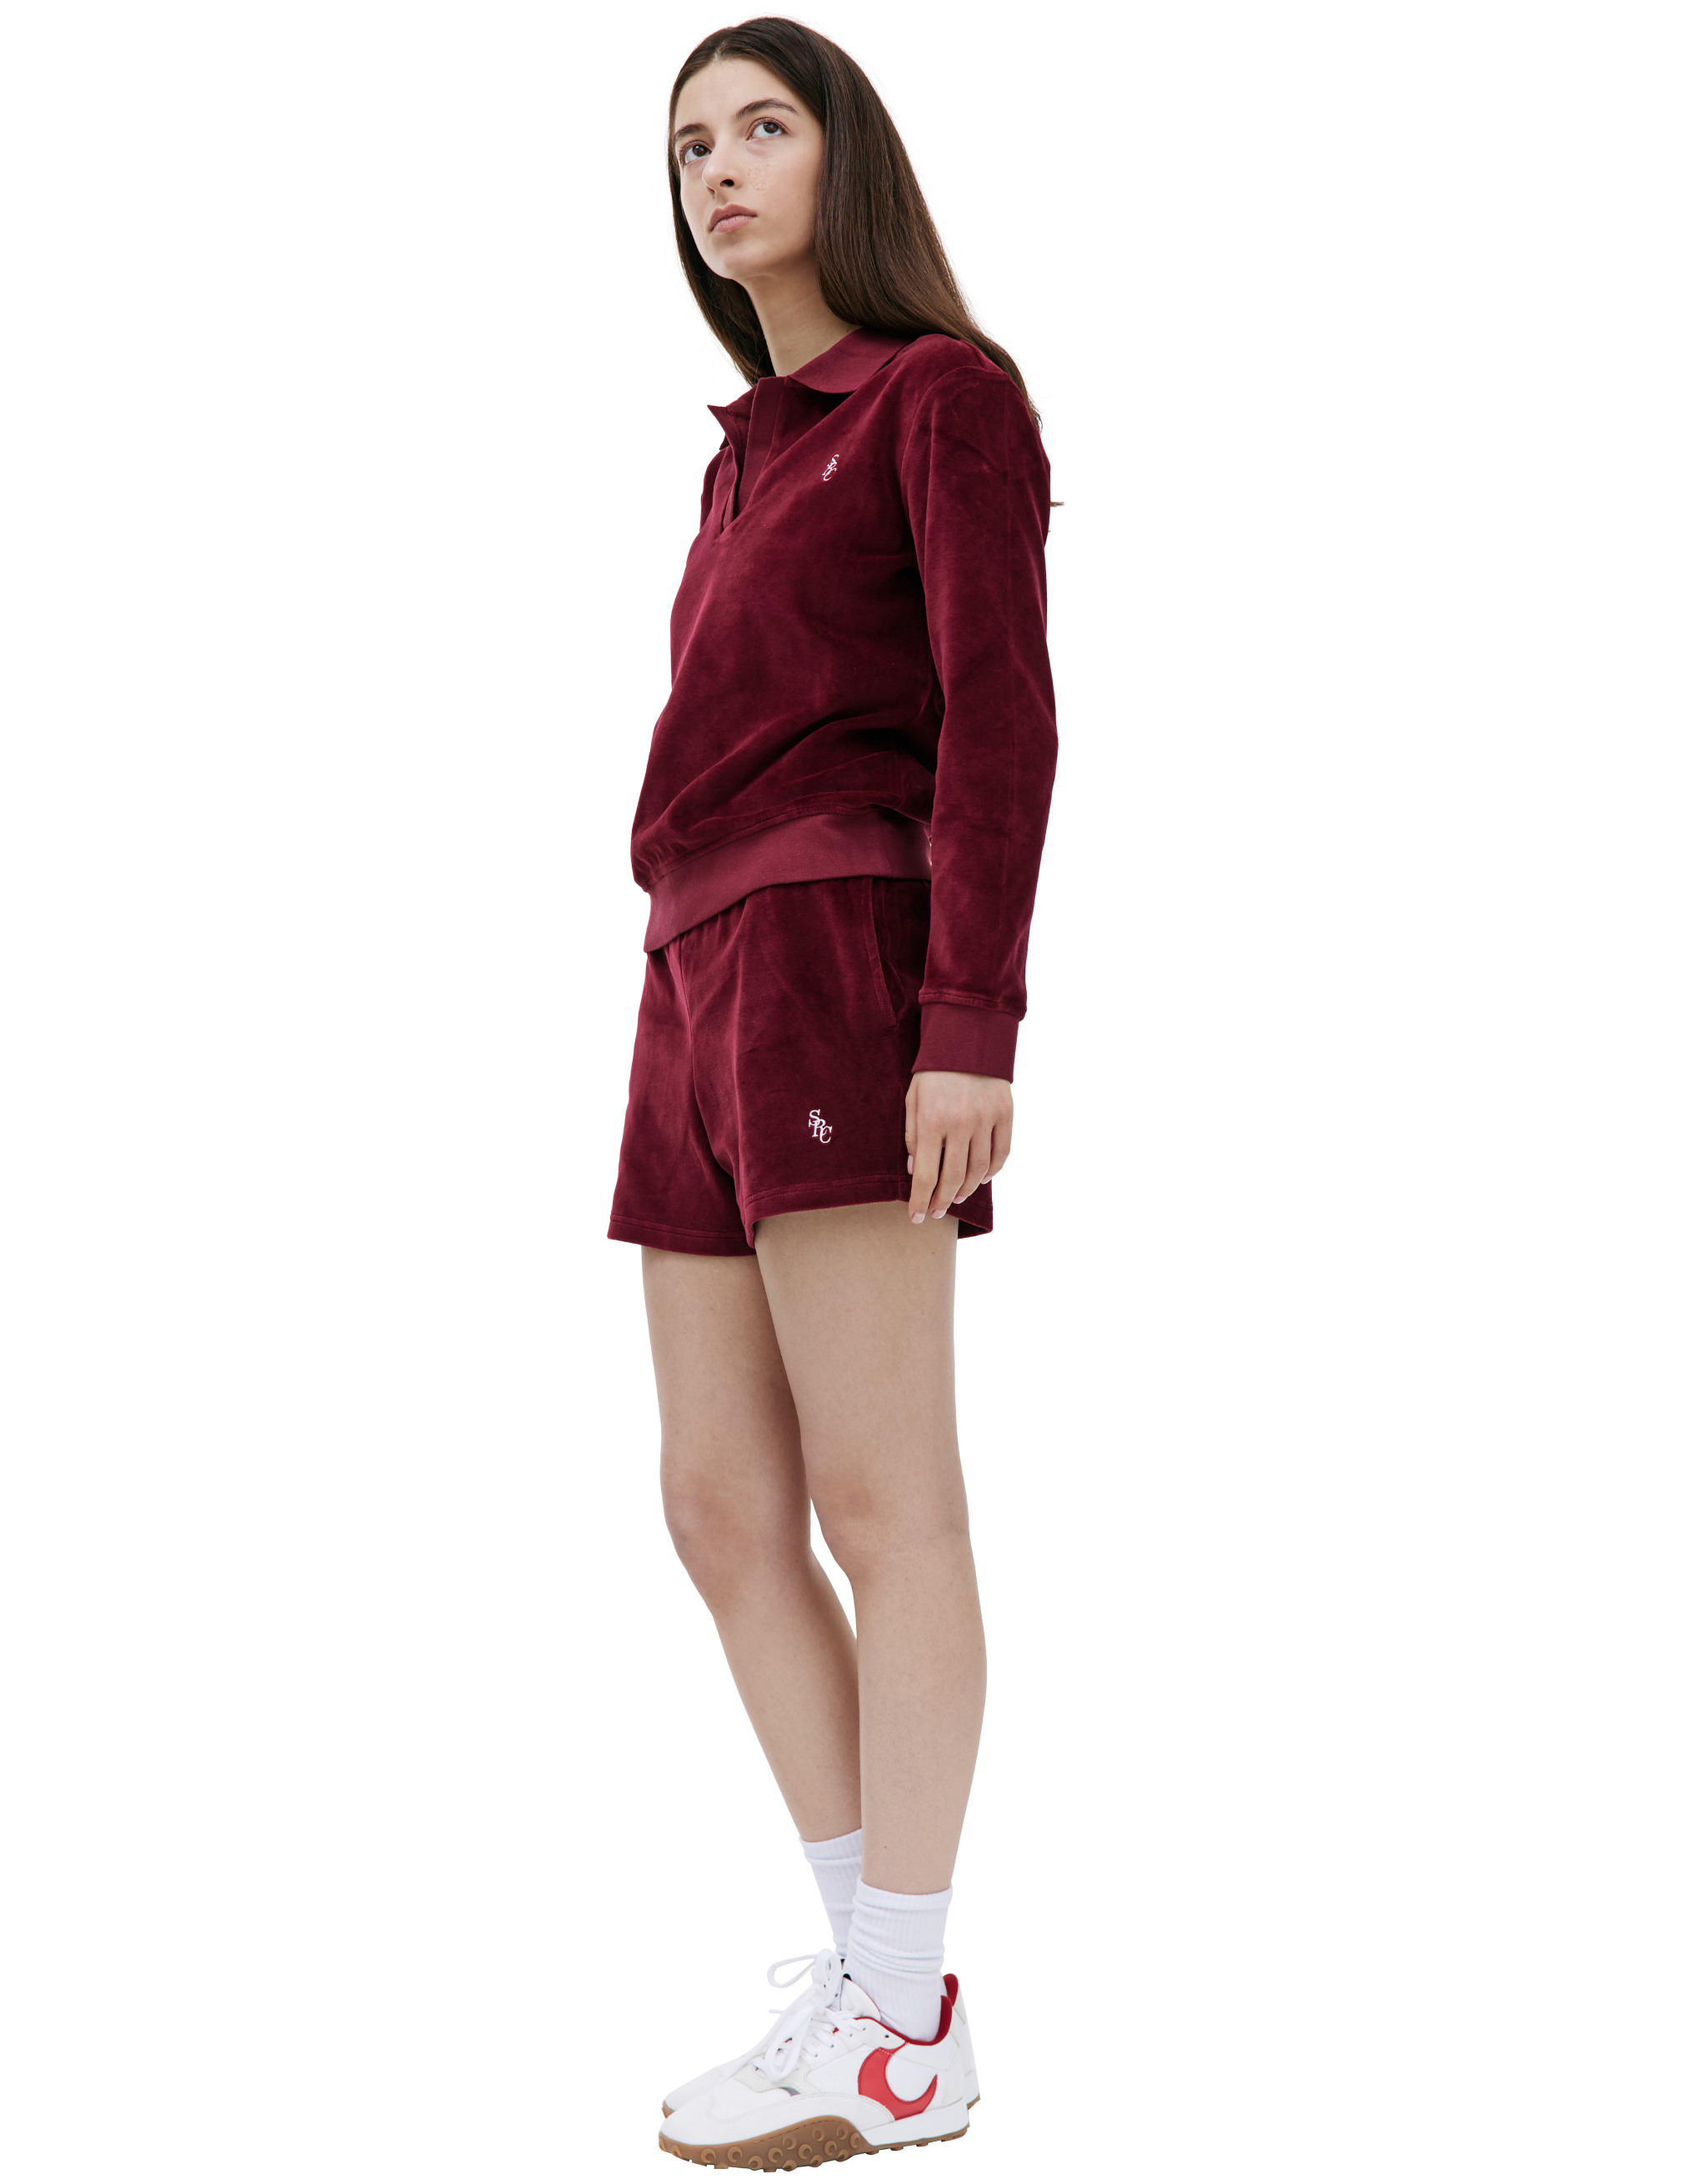 Shop Sporty And Rich Src Velour Longsleeve Polo In Burgundy